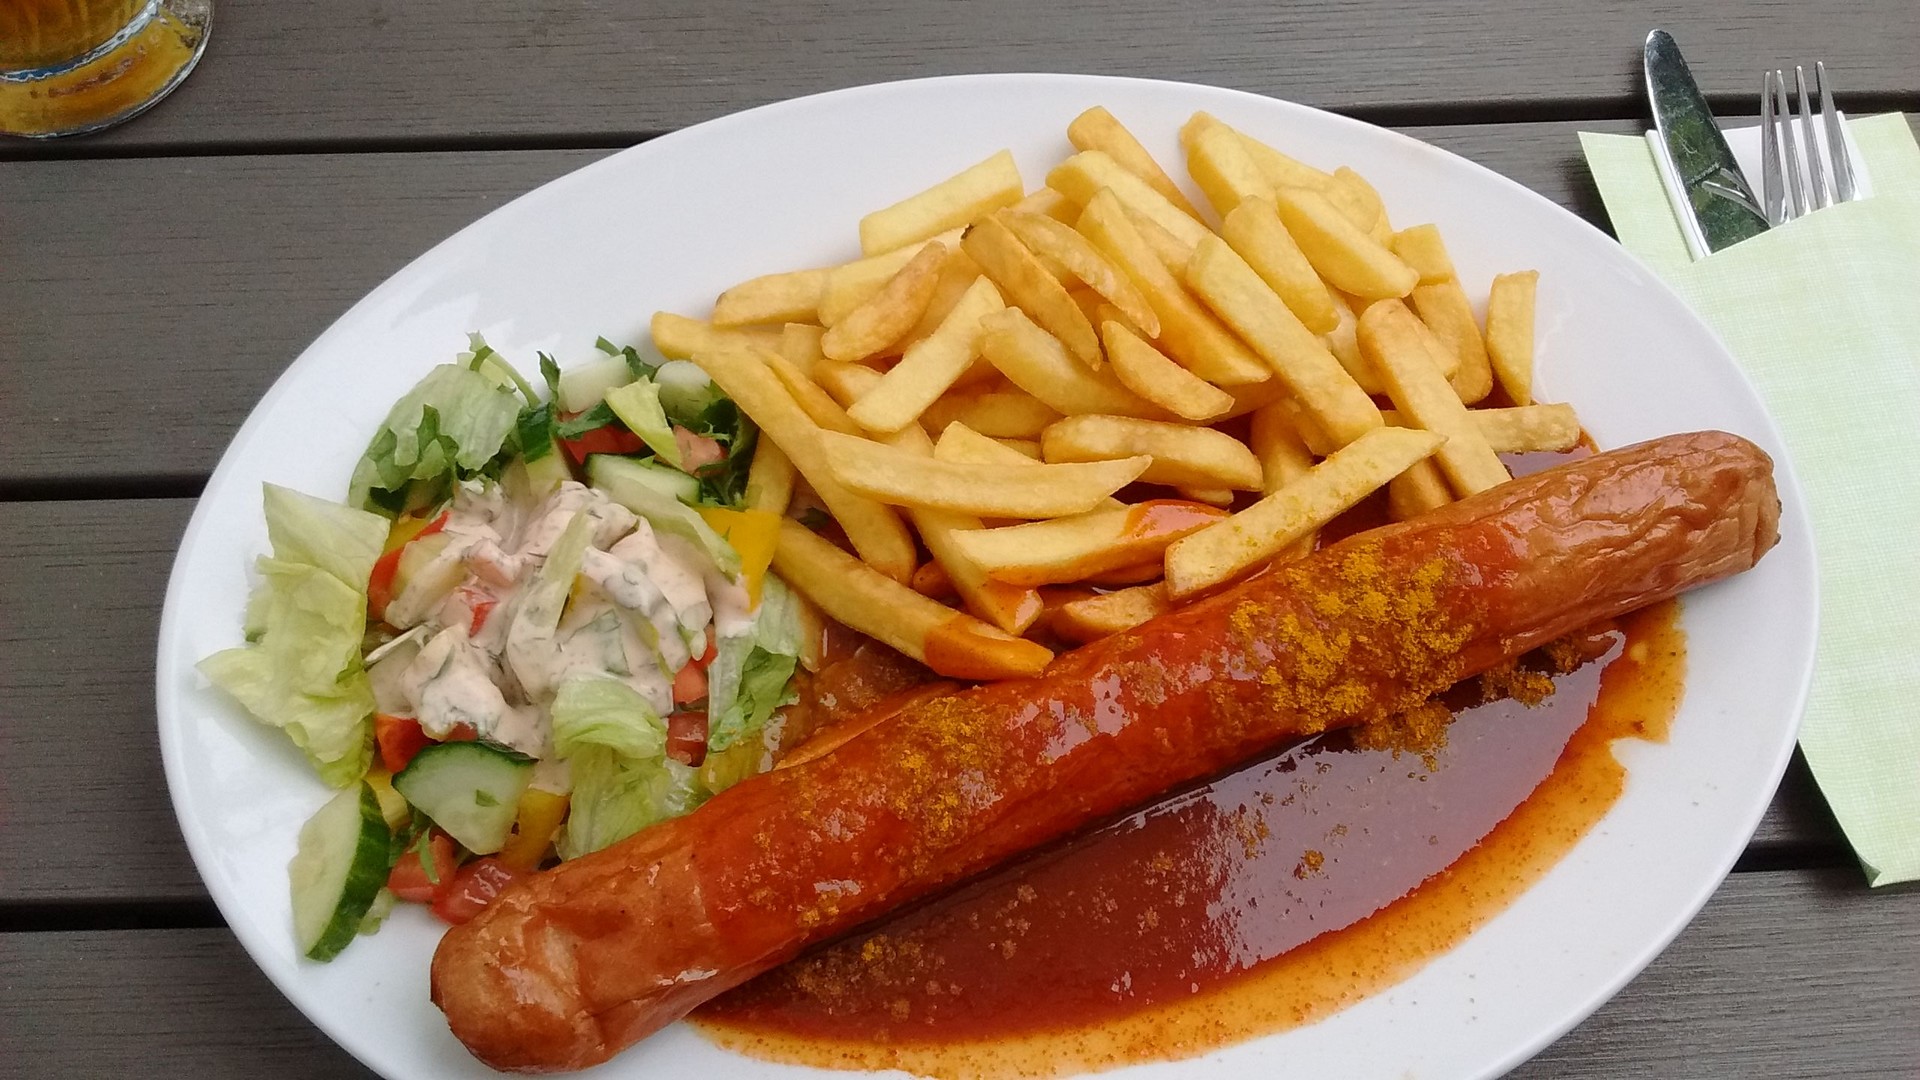 Where to eat the best german sausages in dortmund?